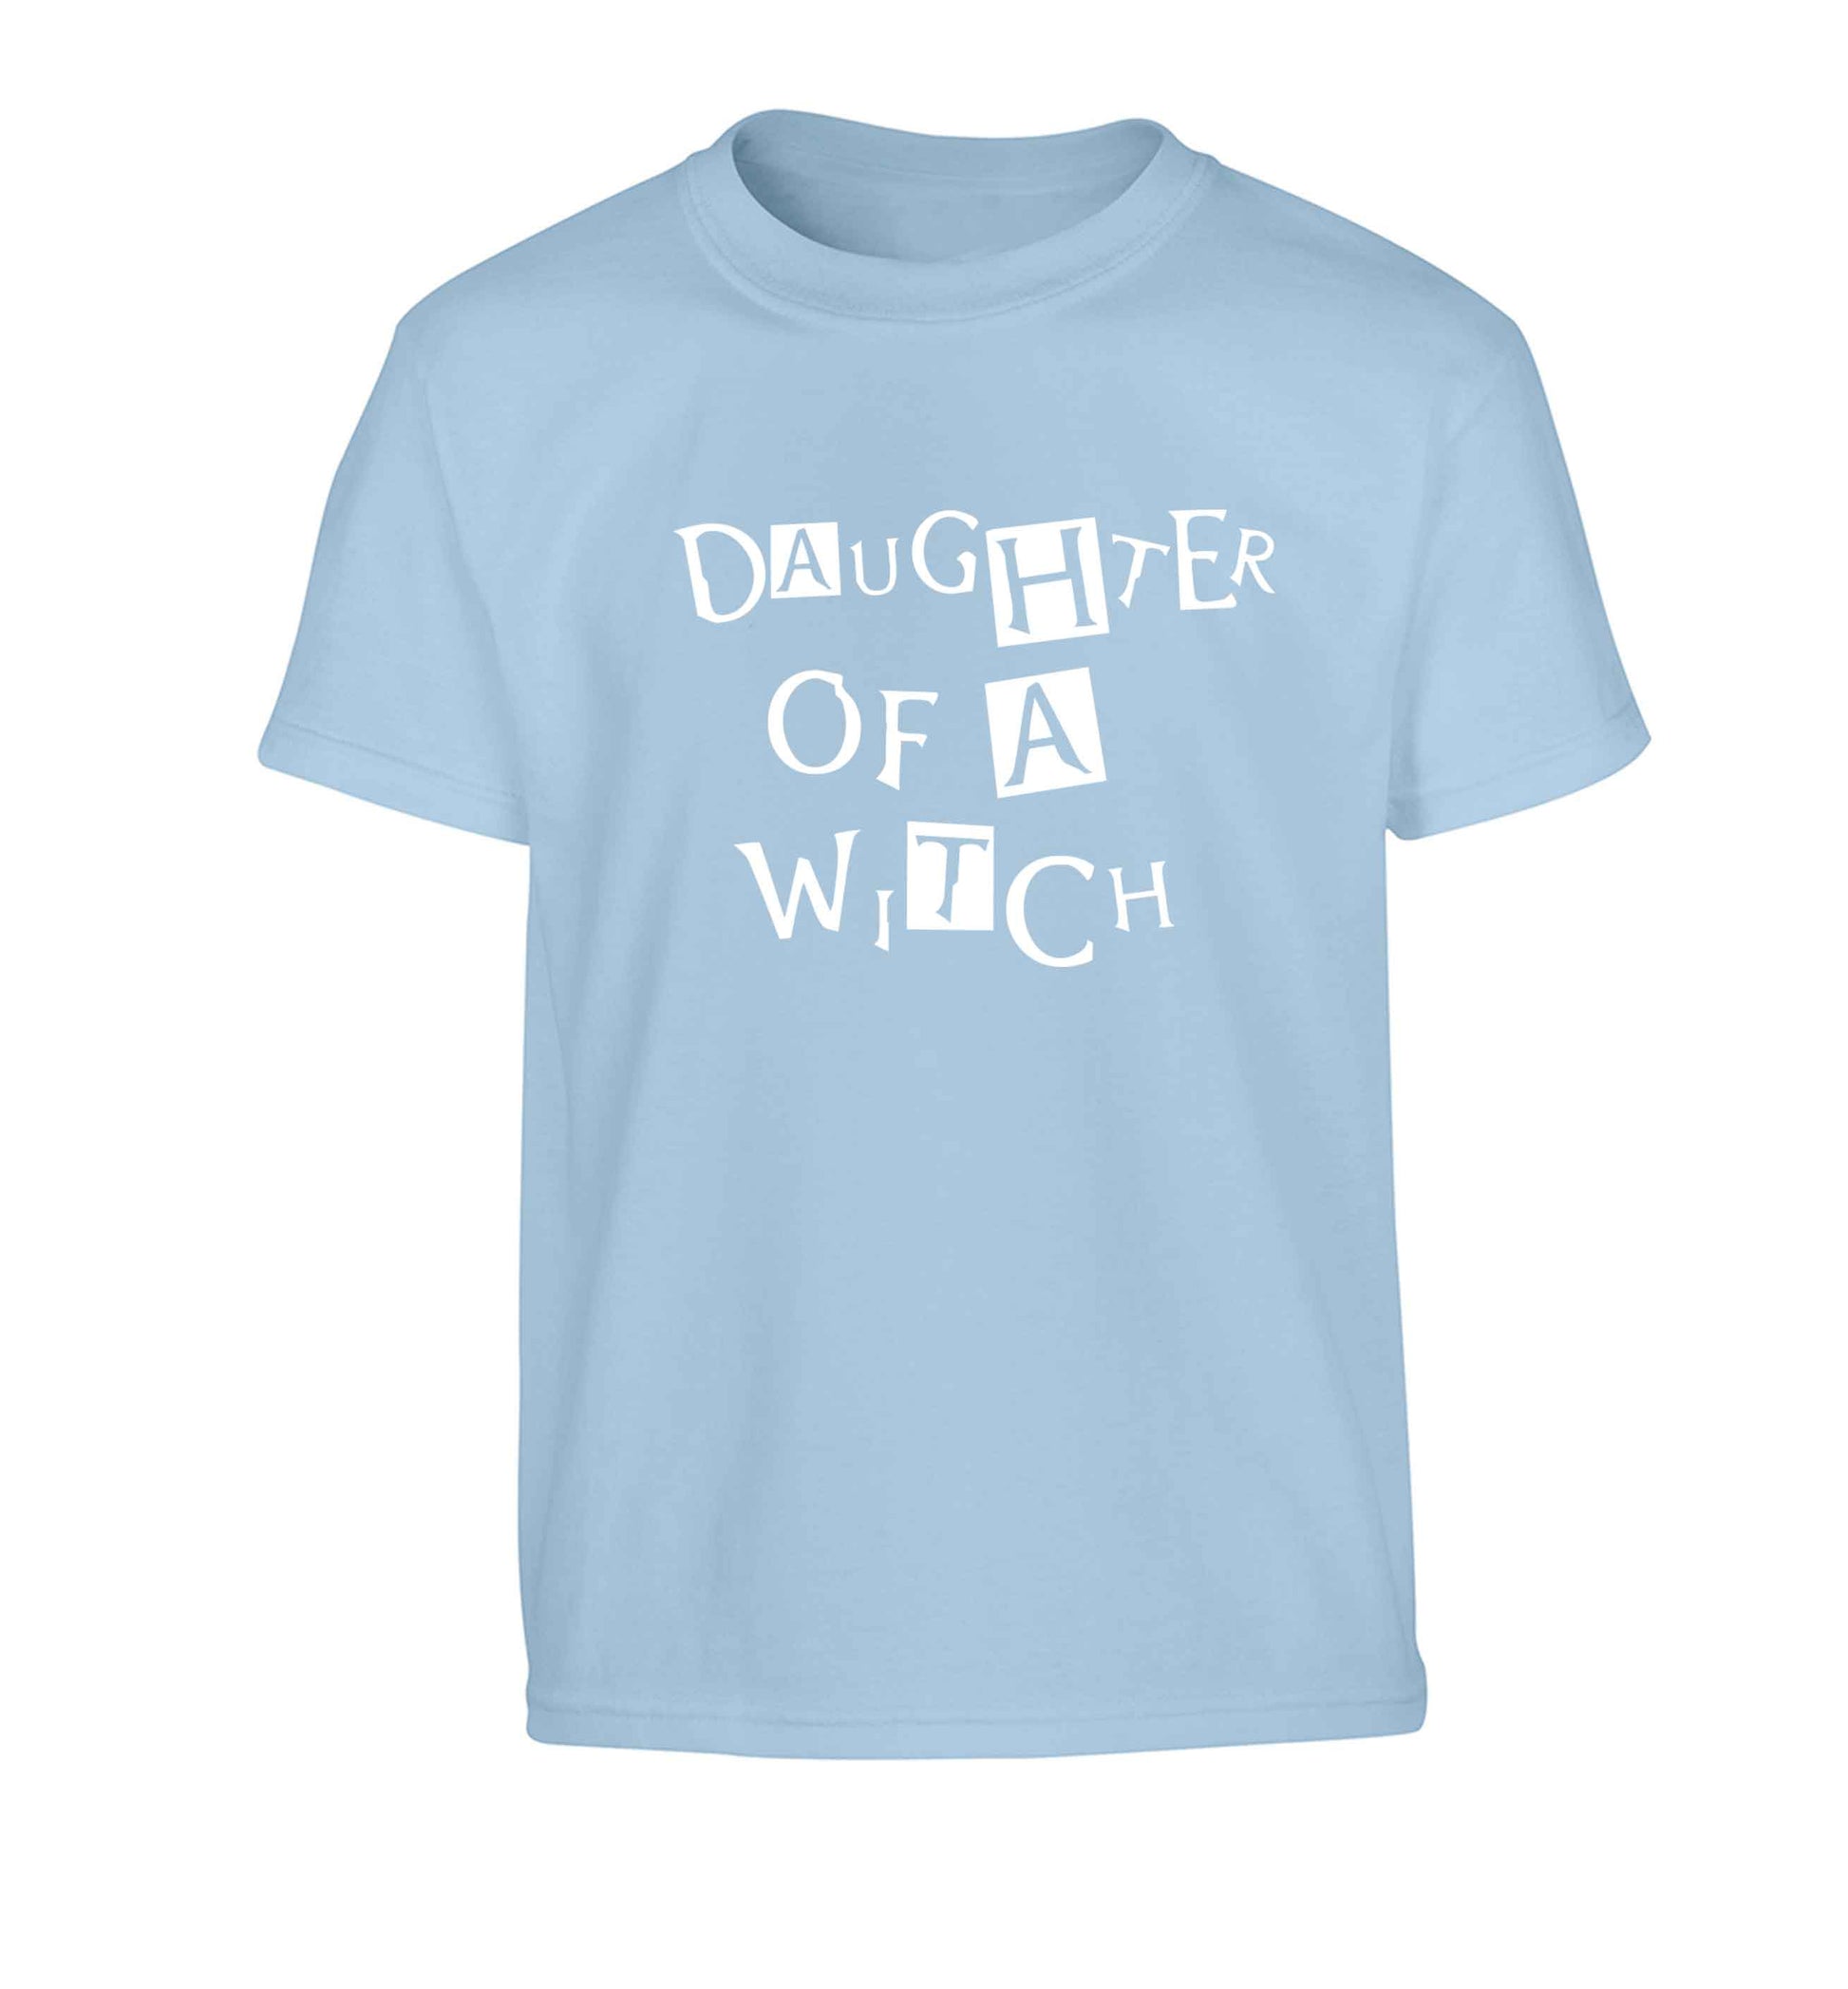 Daughter of a witch Children's light blue Tshirt 12-13 Years